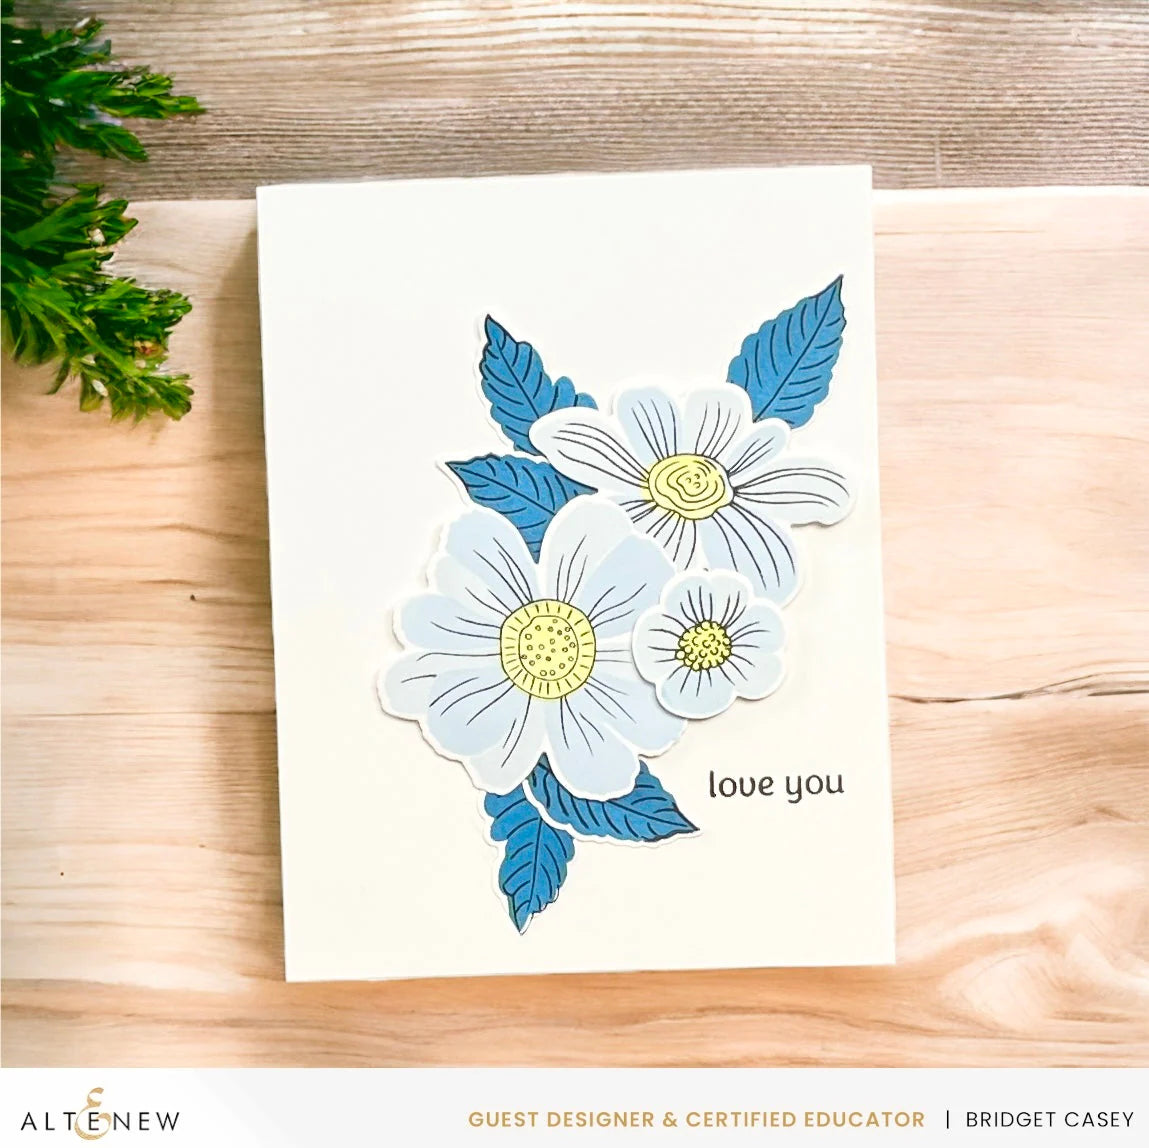 Altenew Dynamic Duo: Floral Whimsy Stamp, Stencil and Die Set